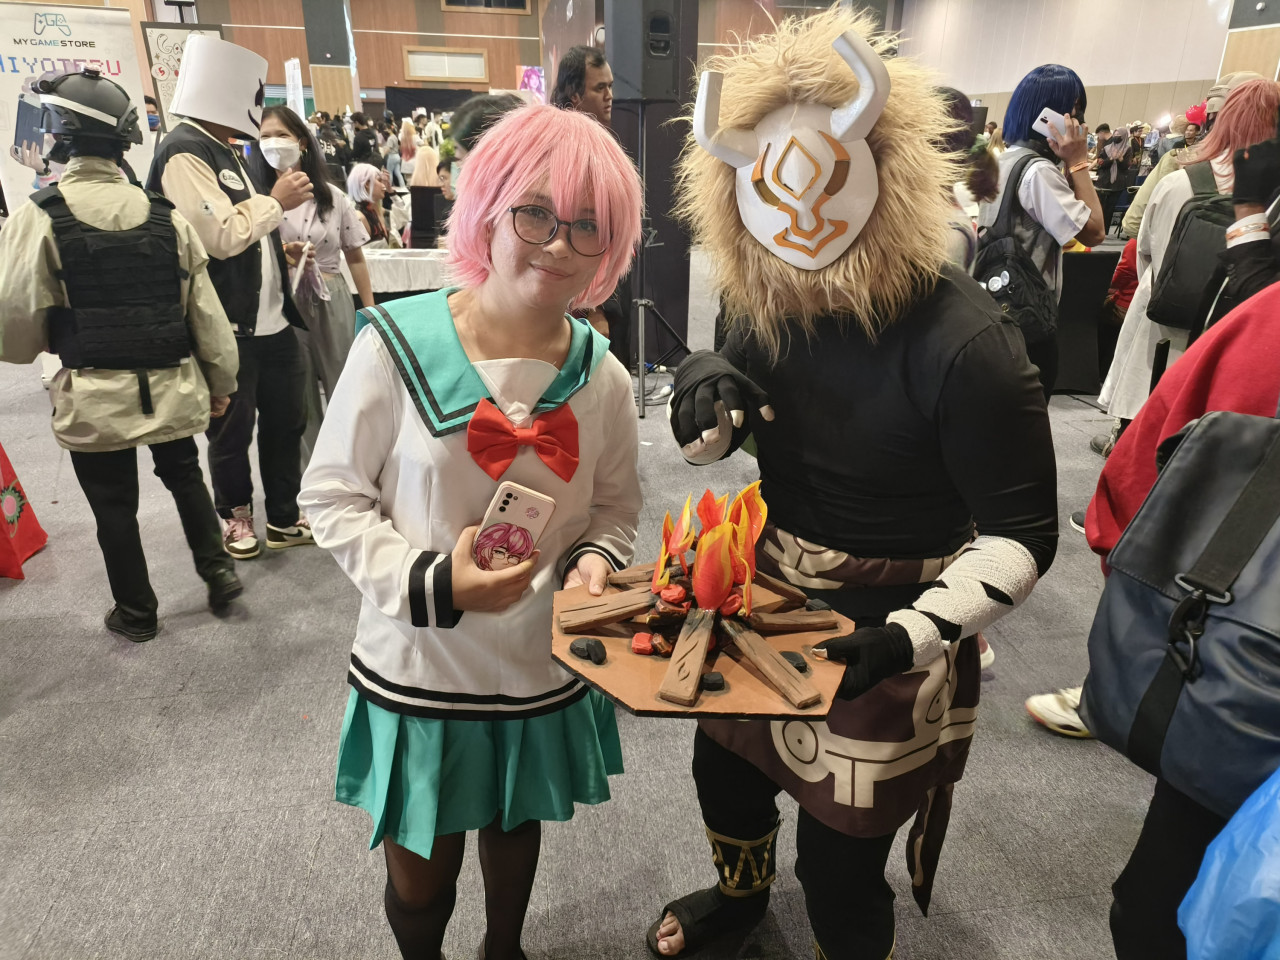 Wilson Kevin (right) dressed as Hilichurl from the video game Genshin Impact. – Rebecca Chong pic